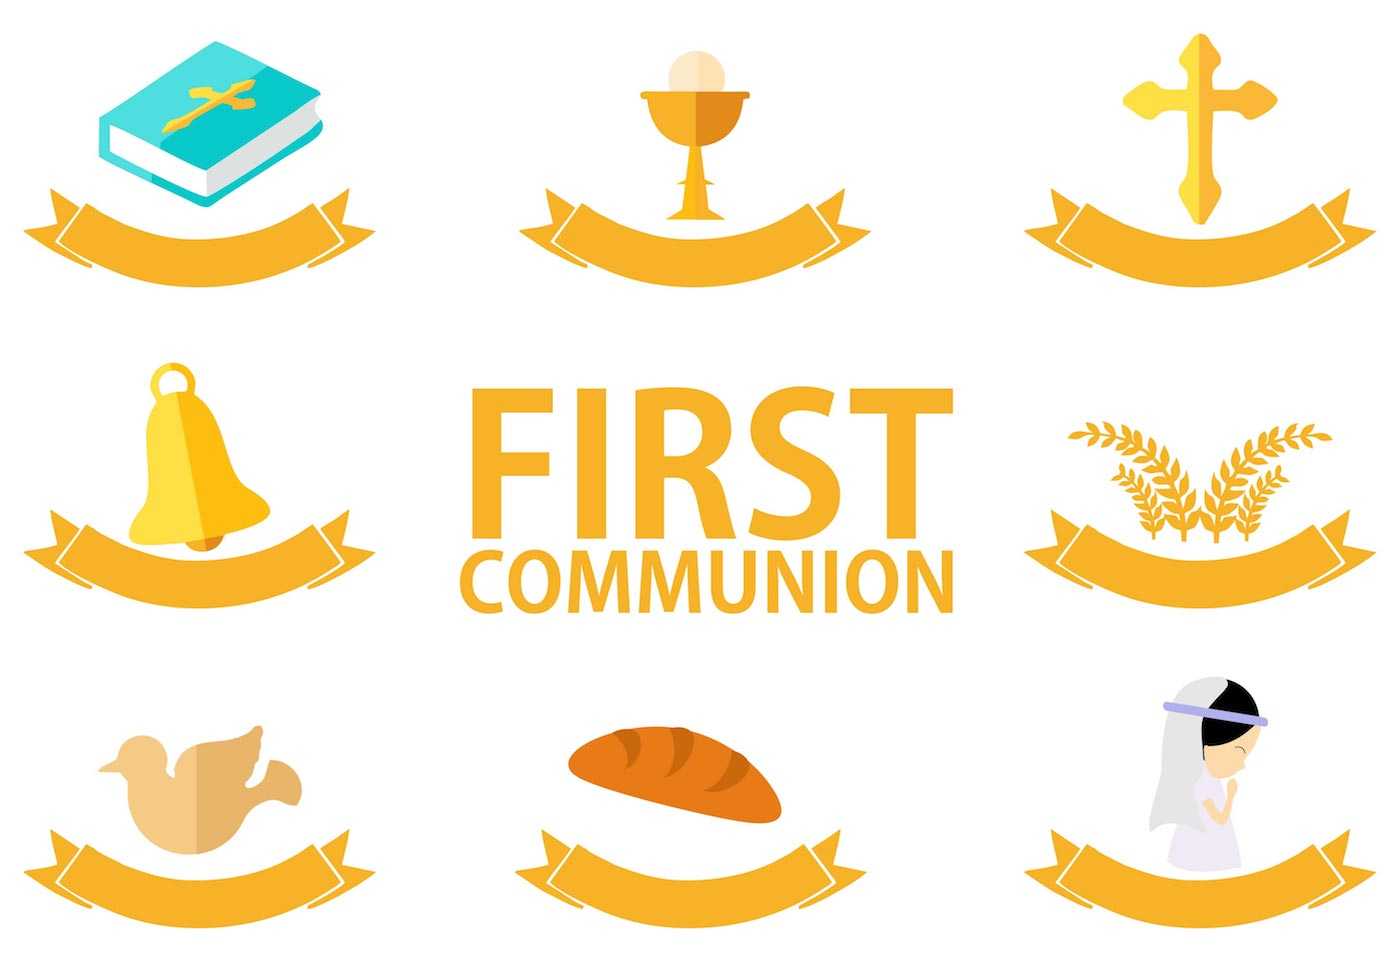 First Communion Template Free Vector Art – (25 Free Downloads) Within Free Printable First Communion Banner Templates